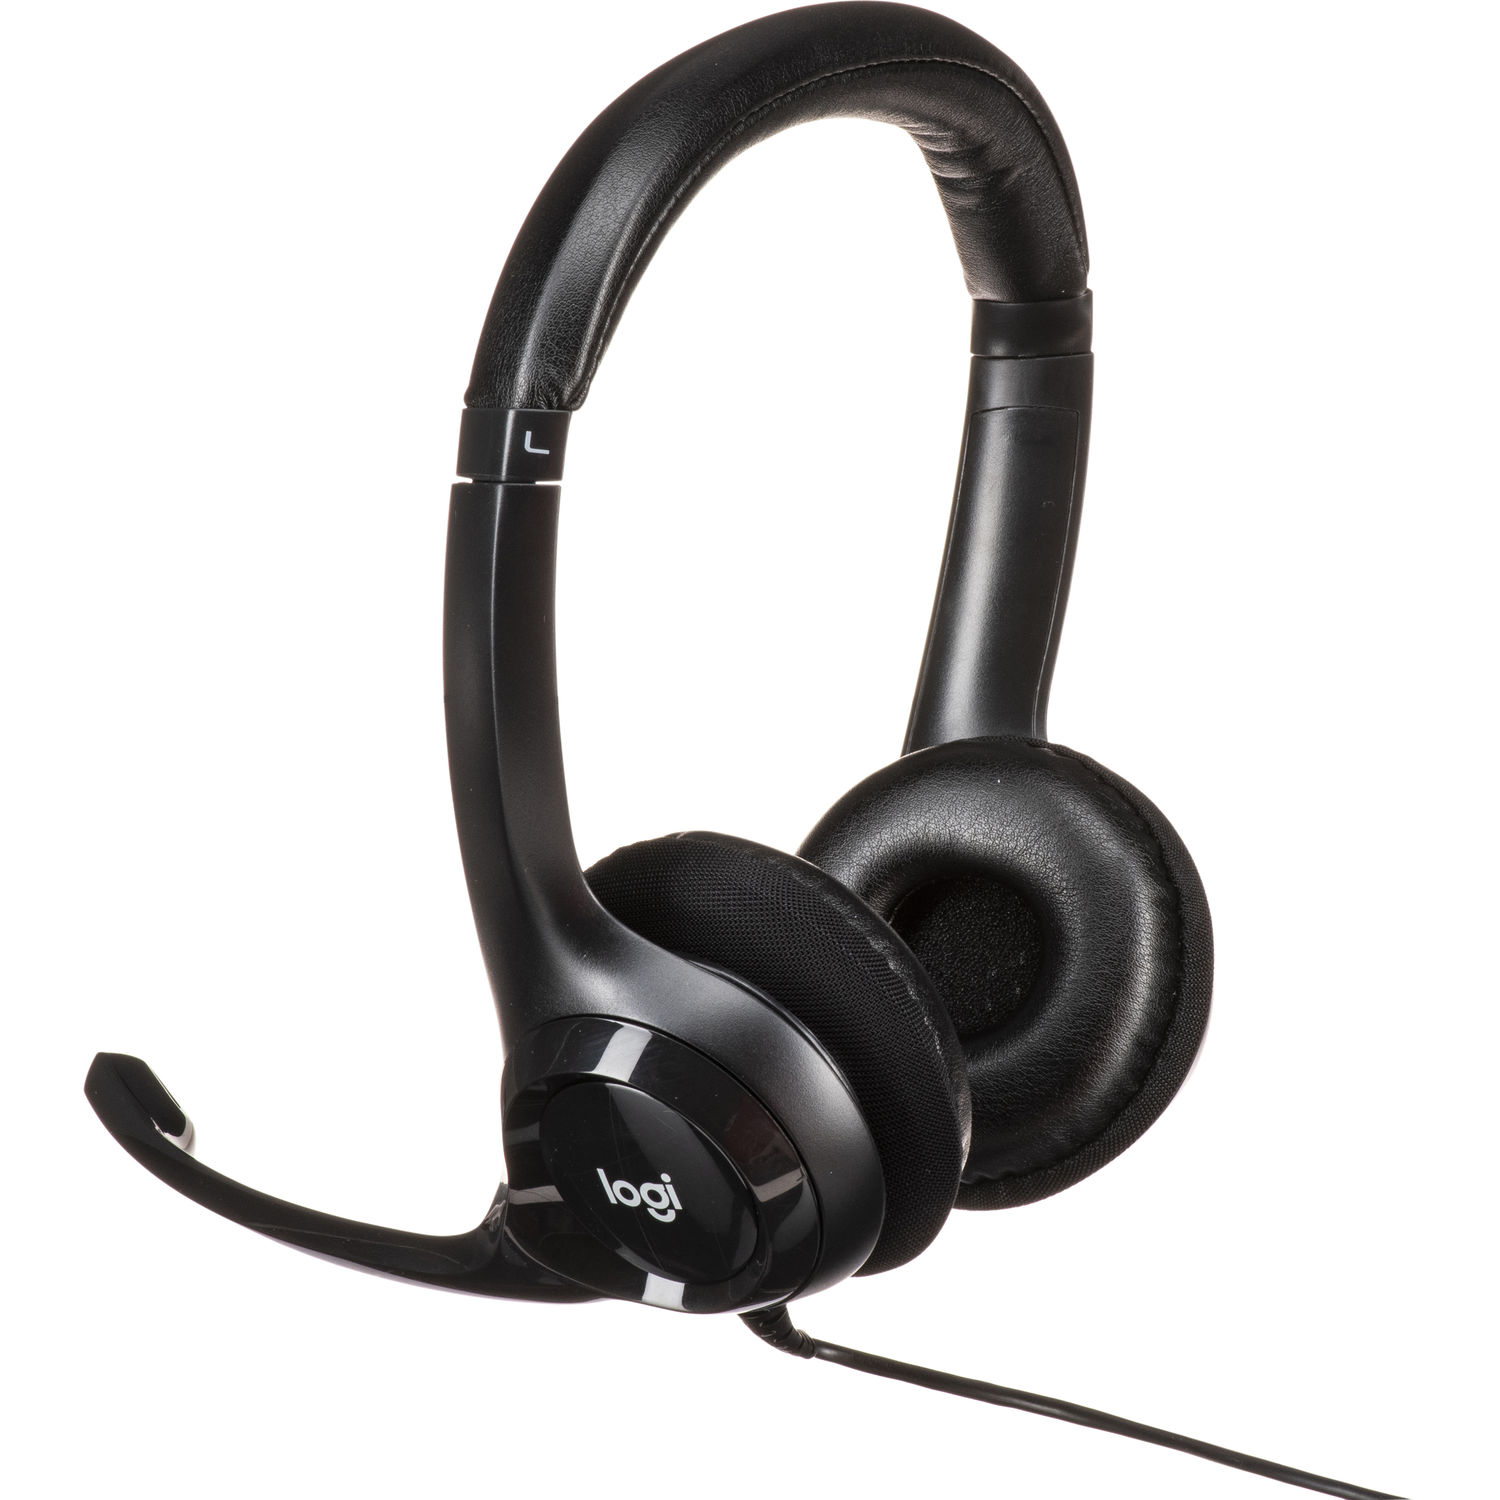 14 Amazing Logitech Headphones With Microphone for 2023